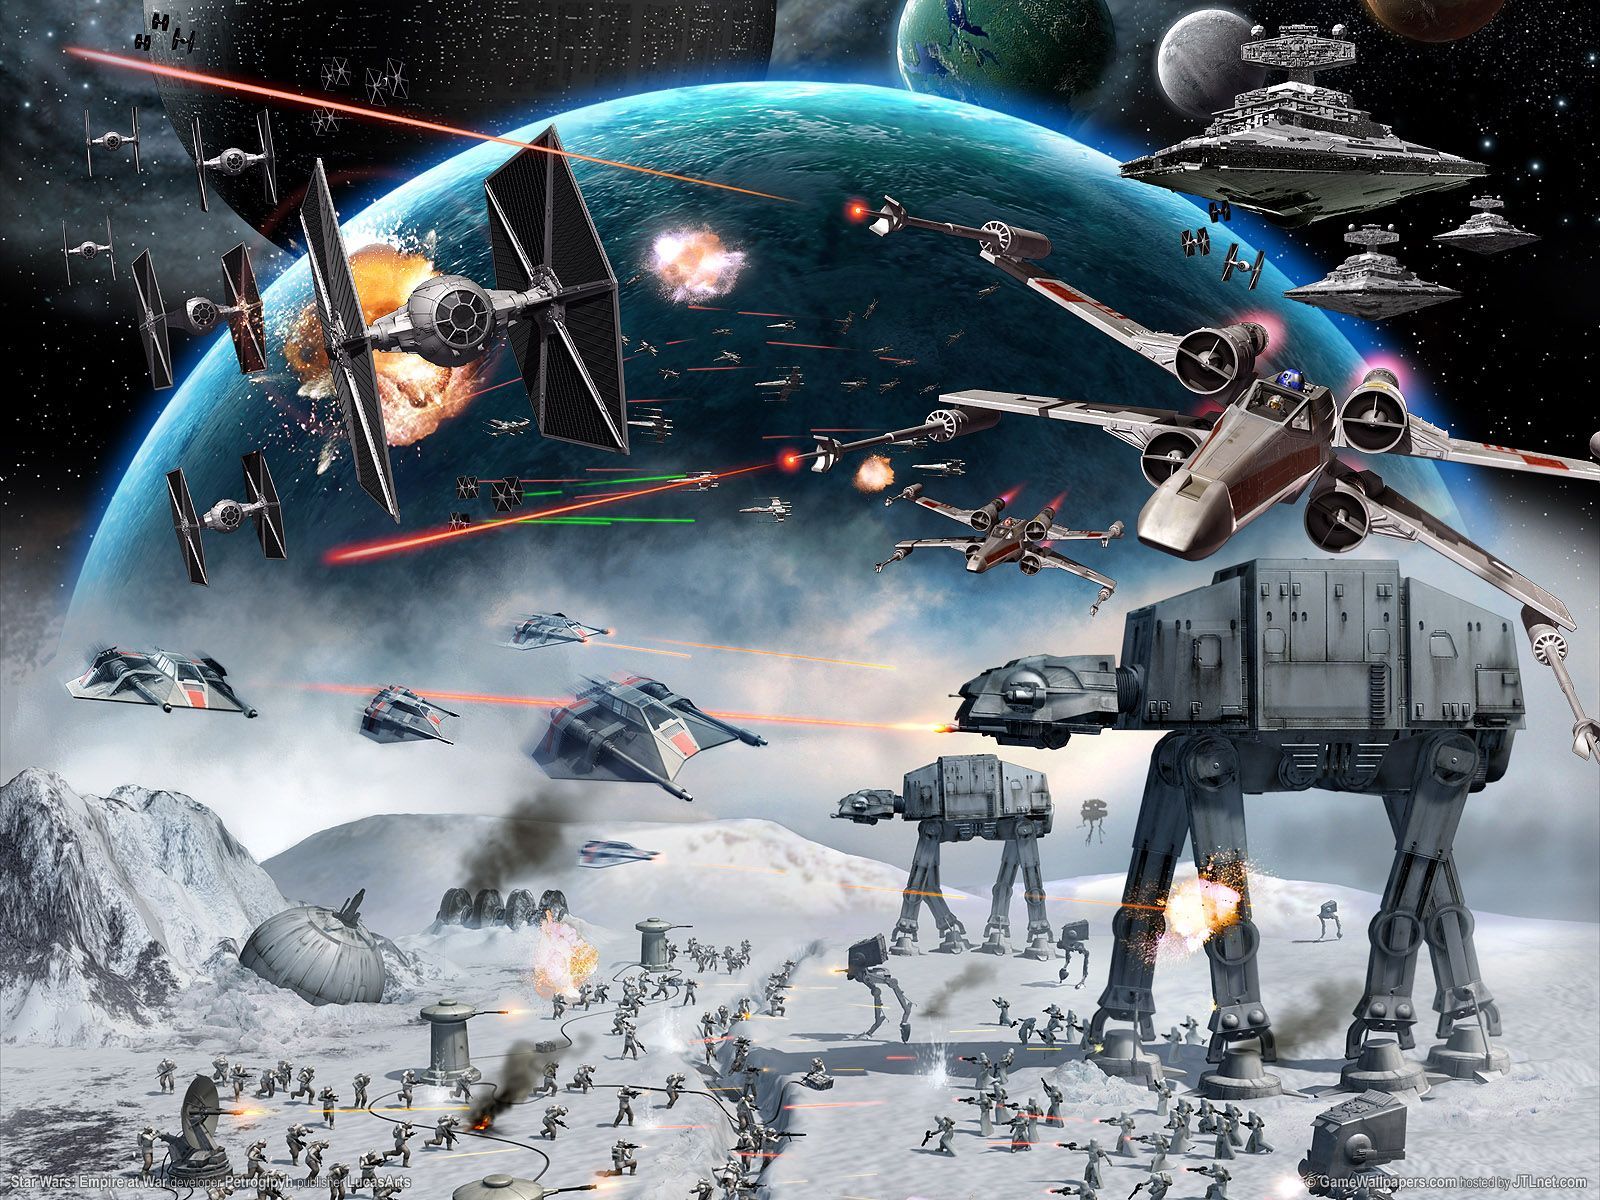 Star Wars Wallpaper. Star wars wallpaper, Star wars picture